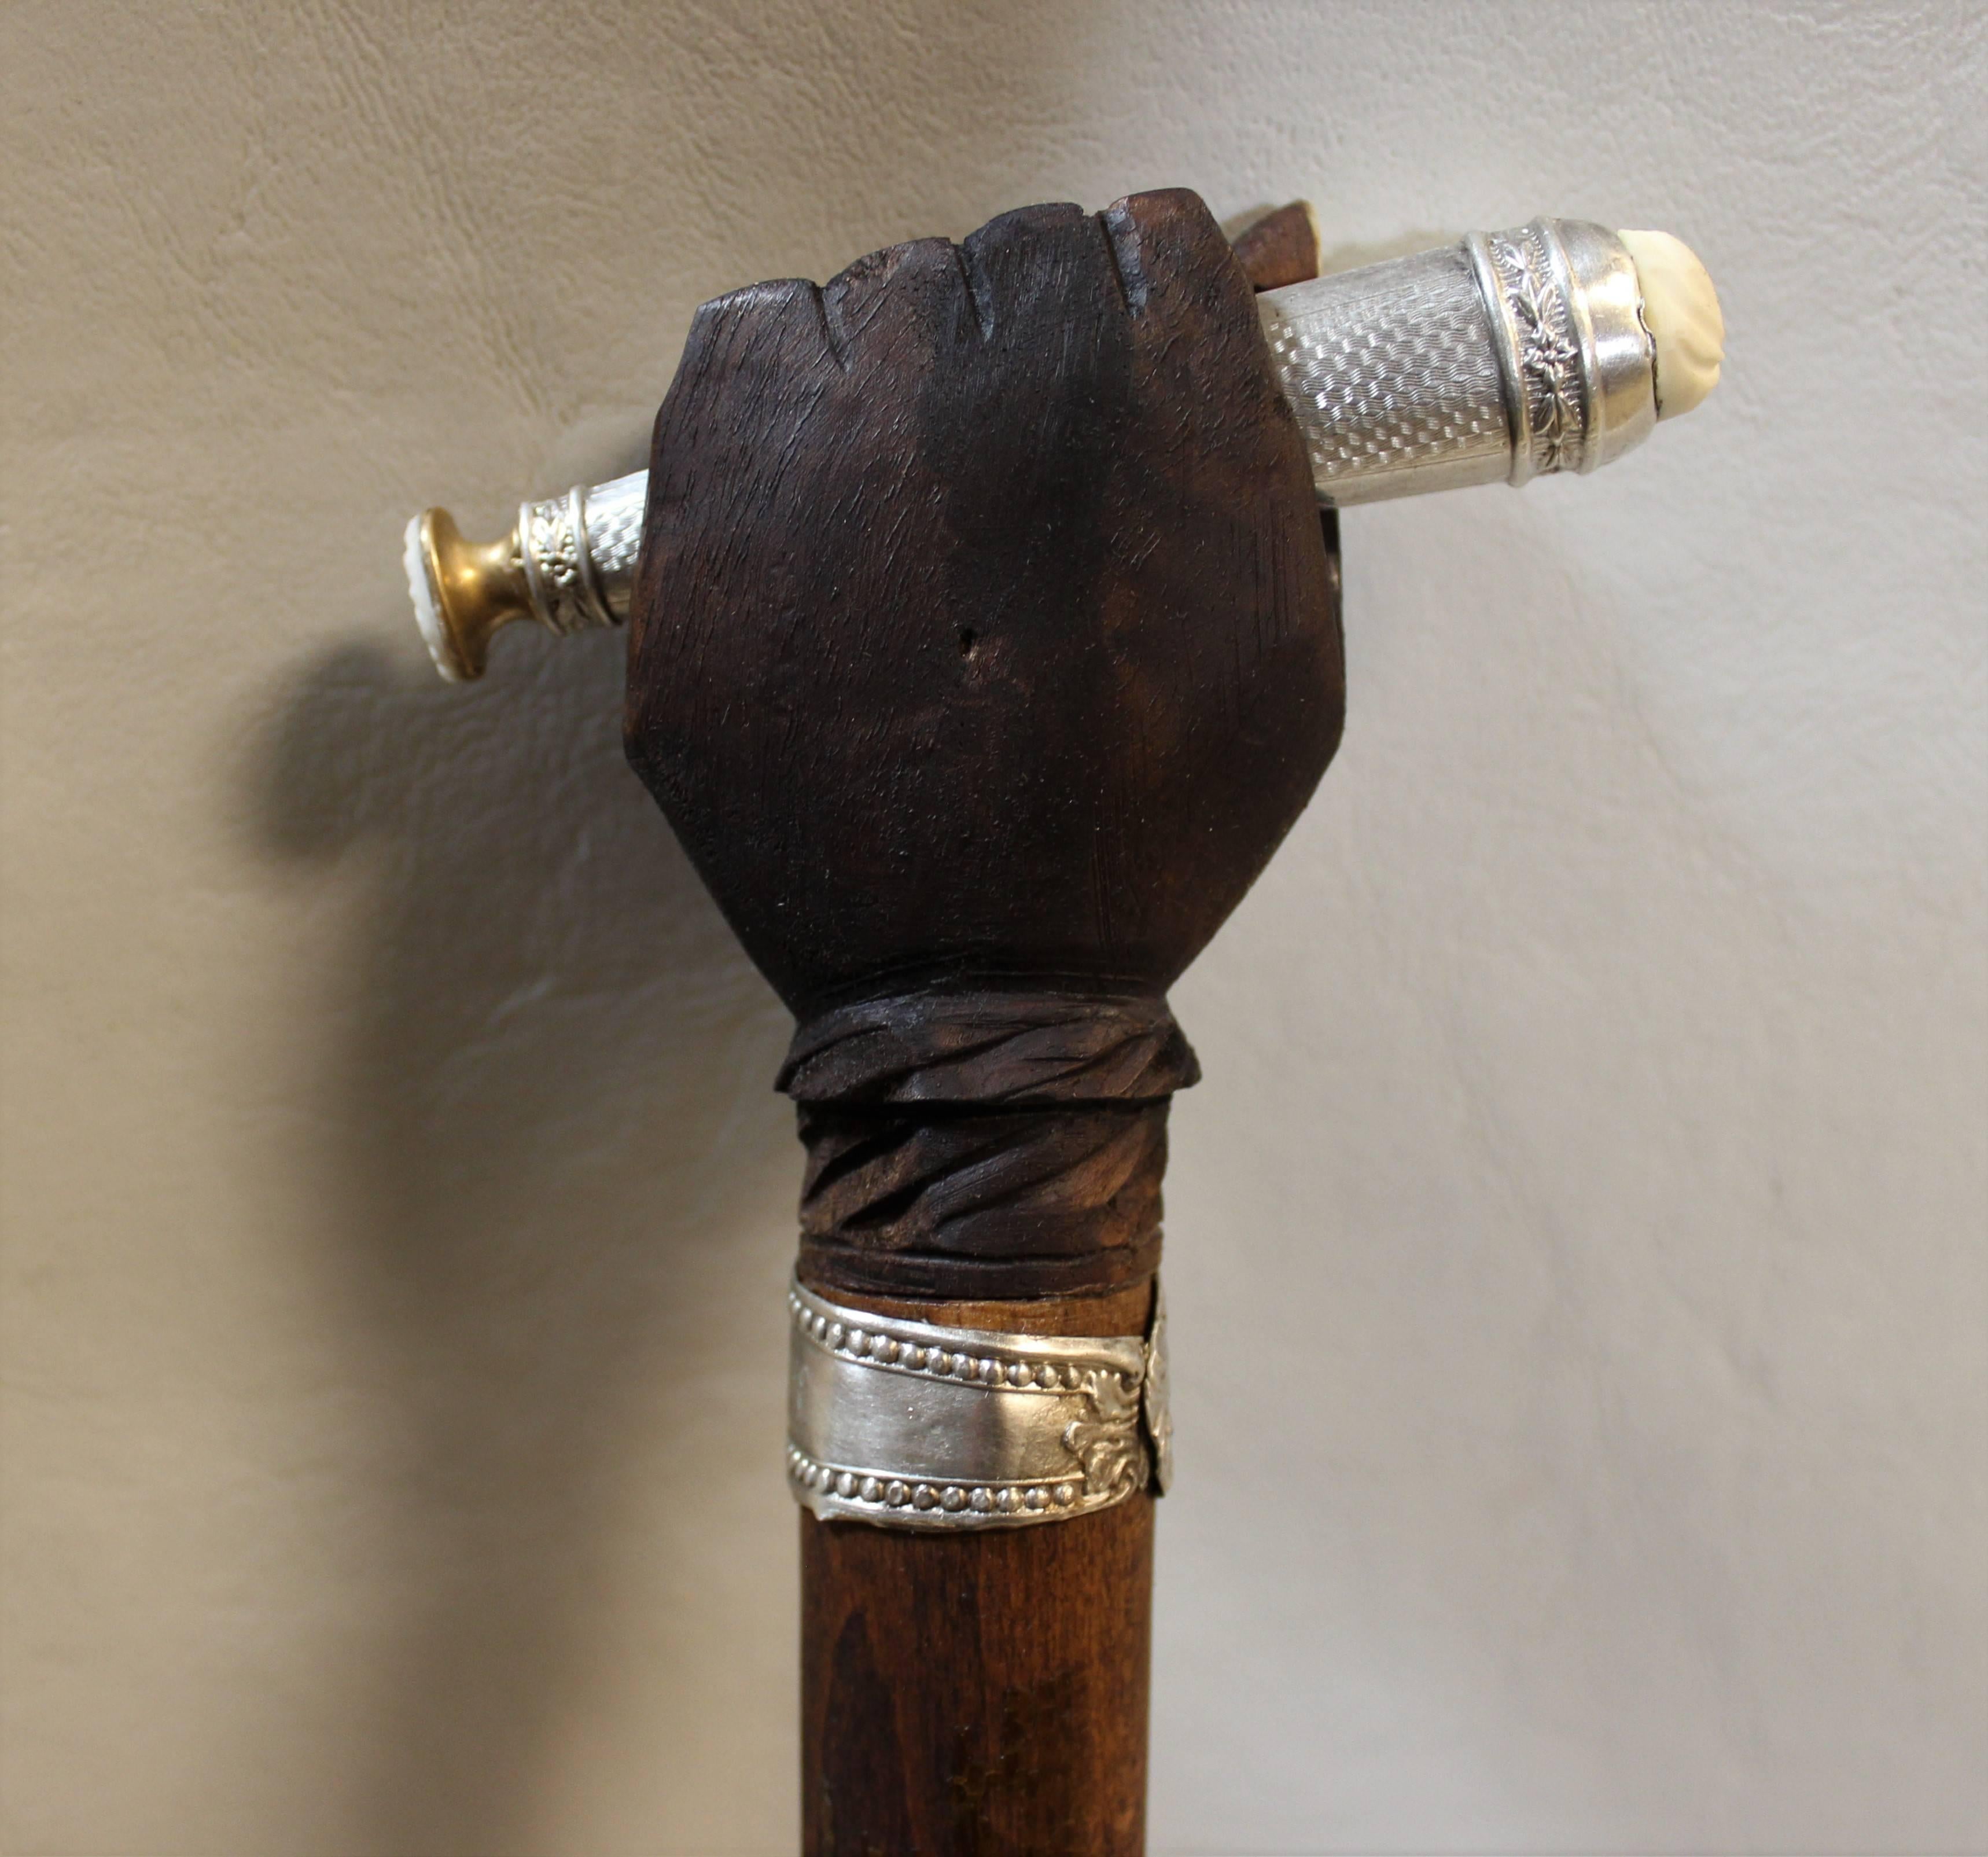 19th century freemasonry walking stick or cane with detachable silver wax seal. Made from wood, bone and silver.